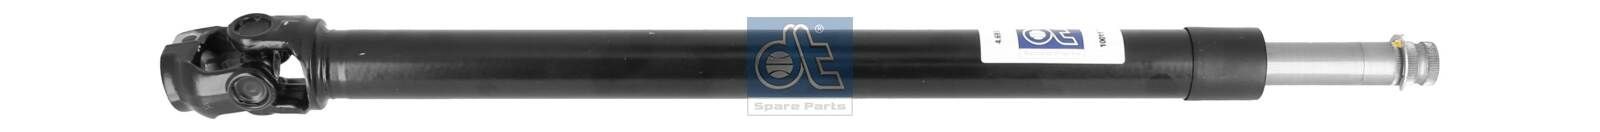 Hyundai Steering Spindle DT Spare Parts 4.69337 at a good price